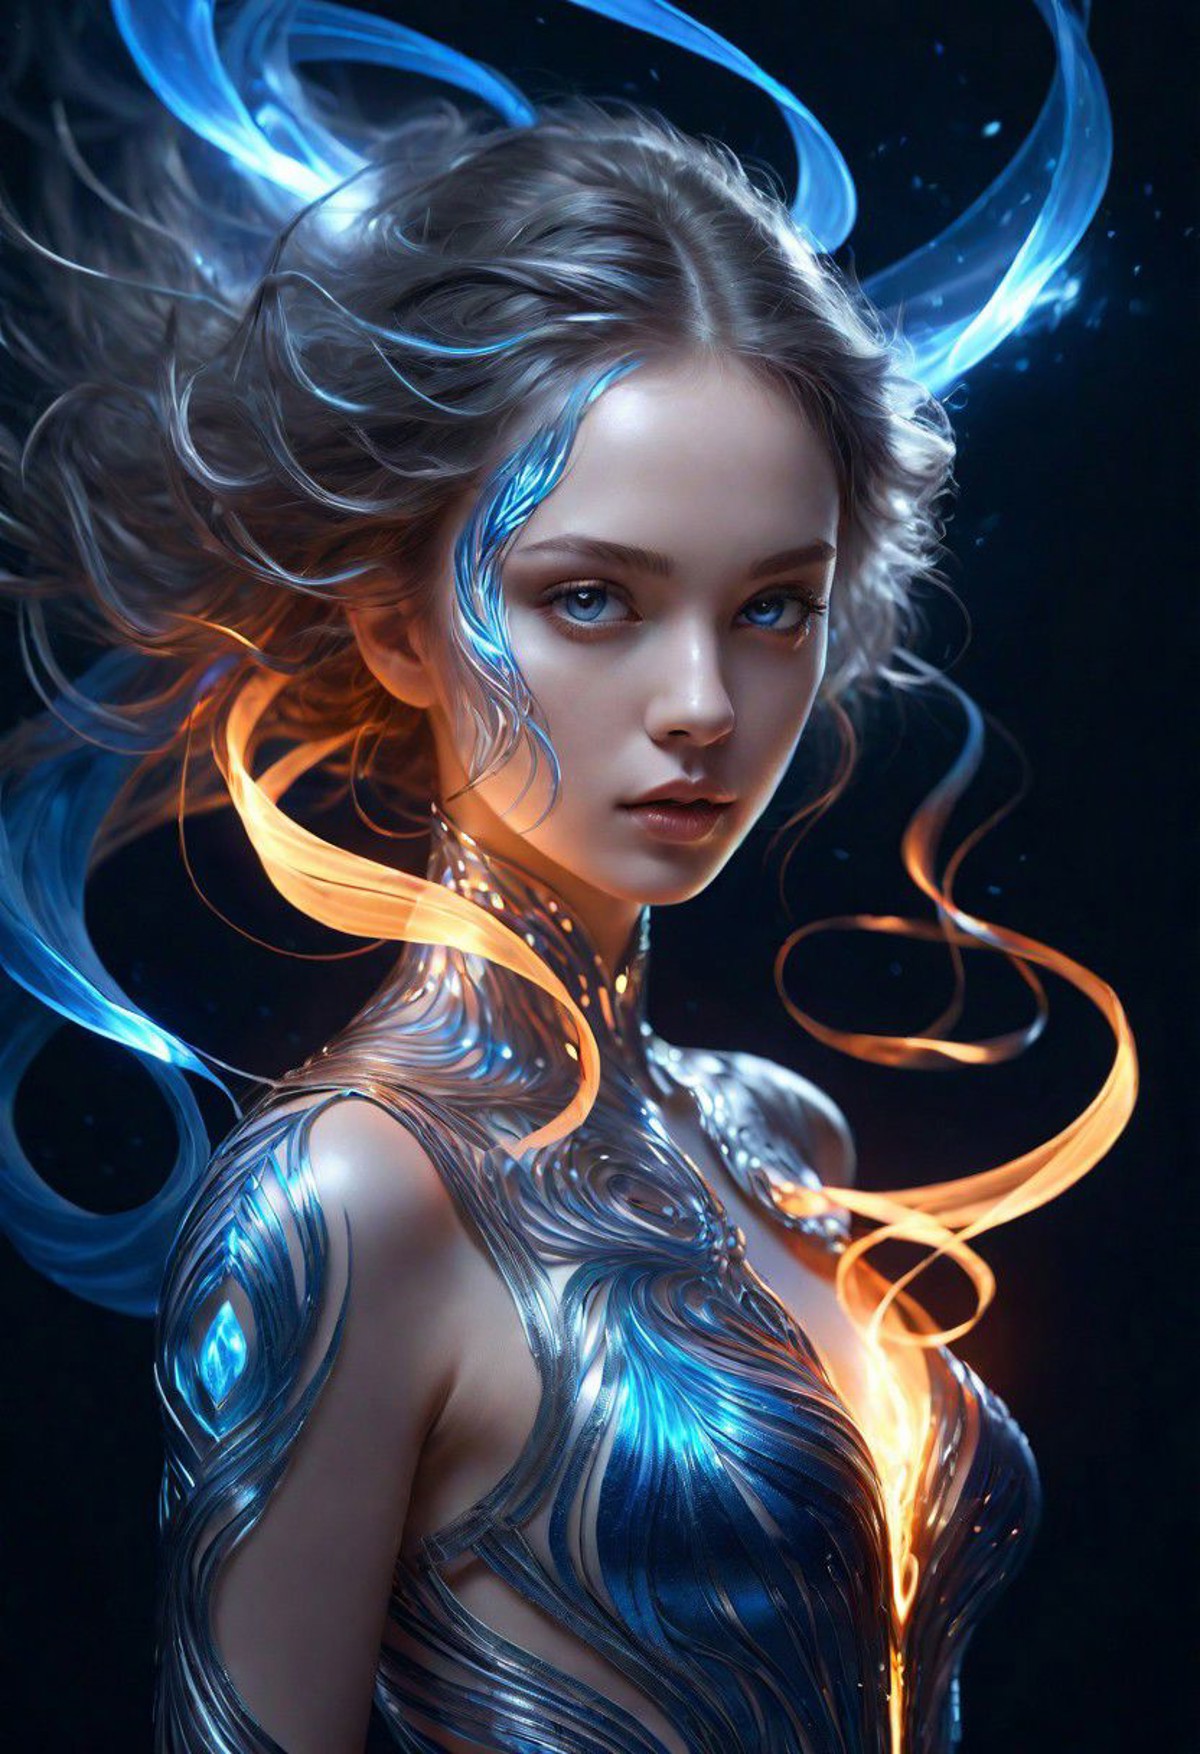 3D Illustration. Surreal, realistic, silver monochrome female, flying, weaving light and blue fire, plumage, fiery glow fr...